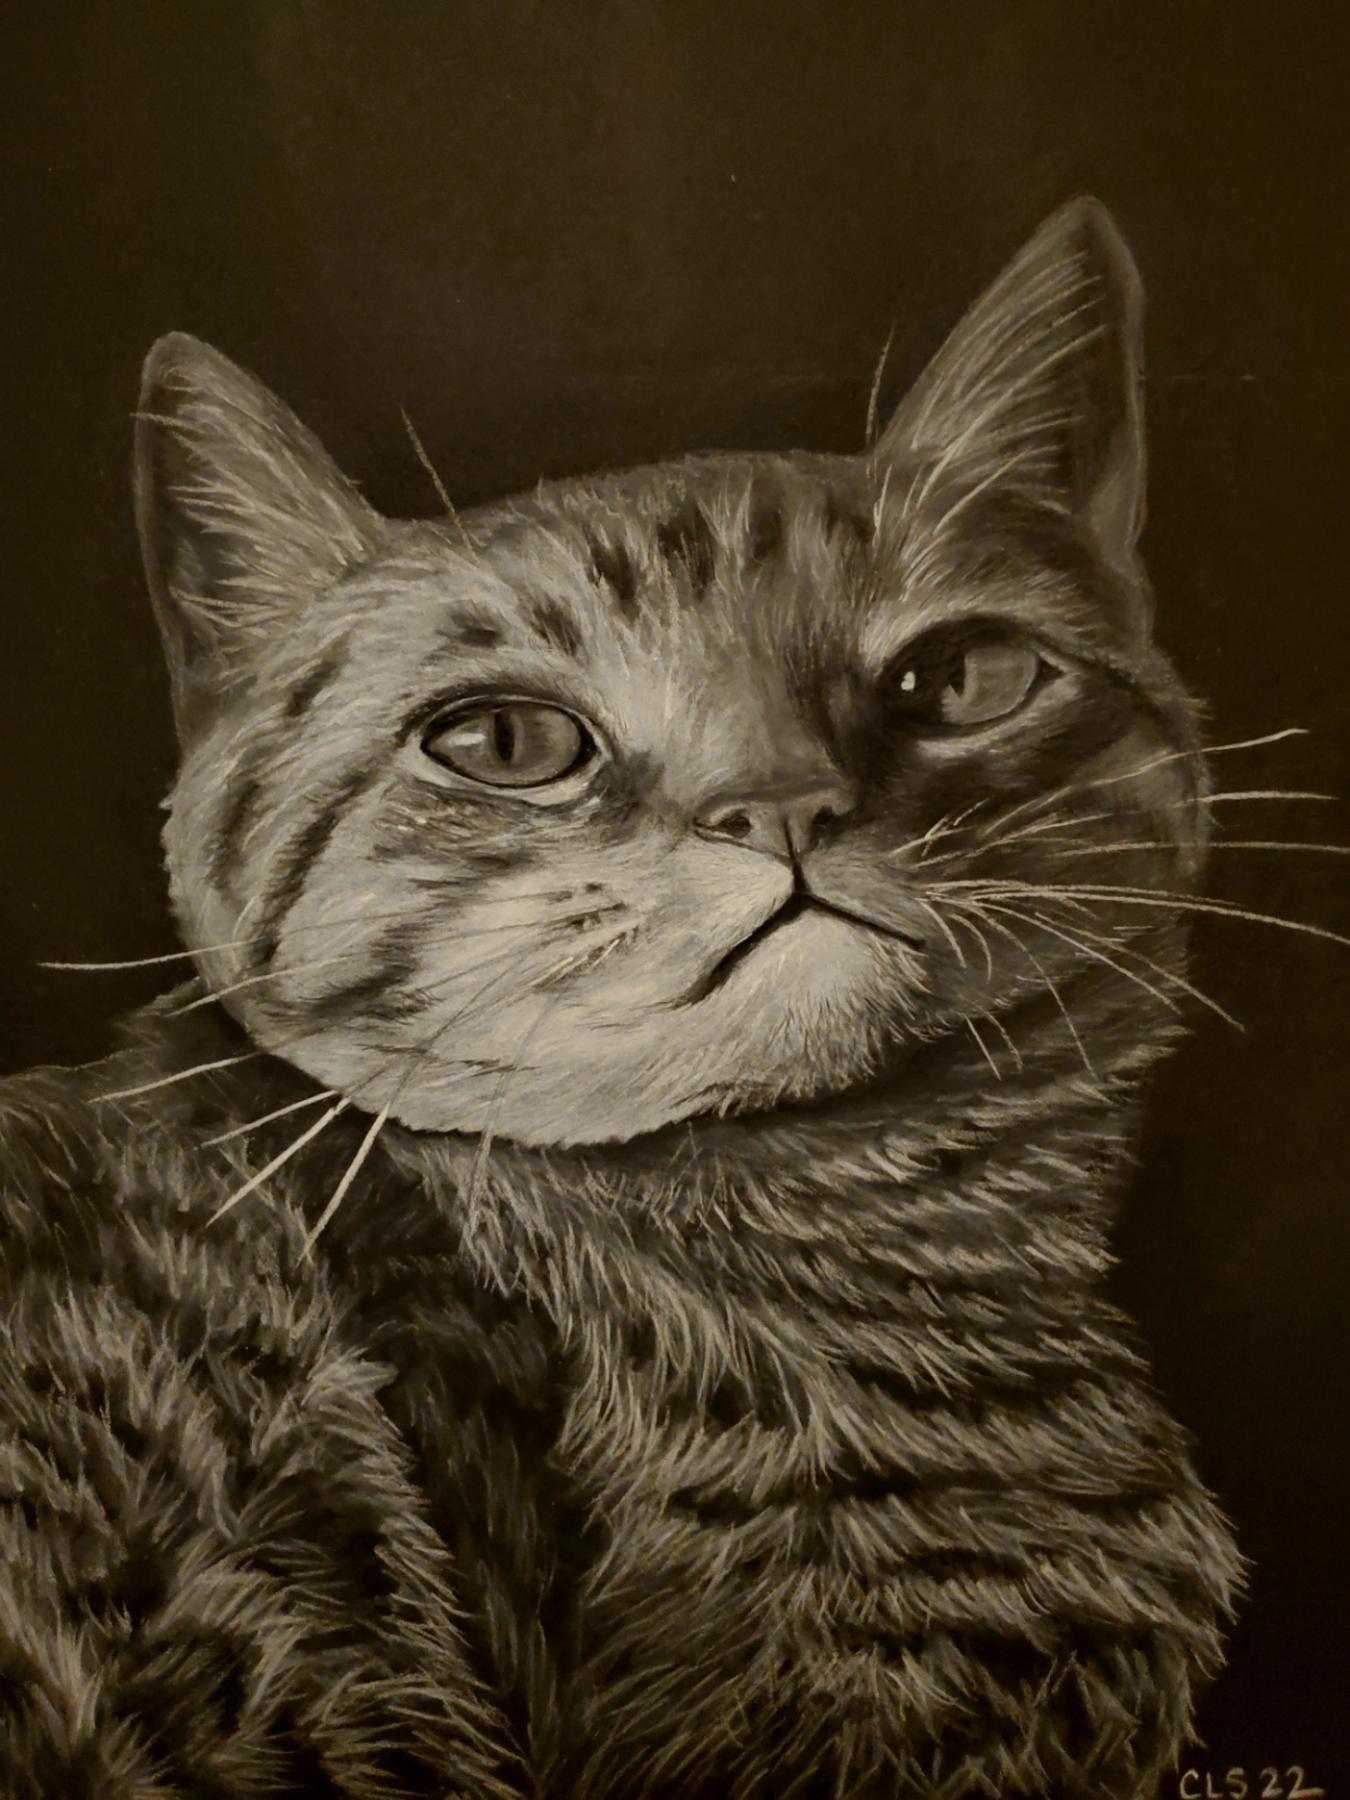 A tabby cat drawn in white charcoal on black paper.